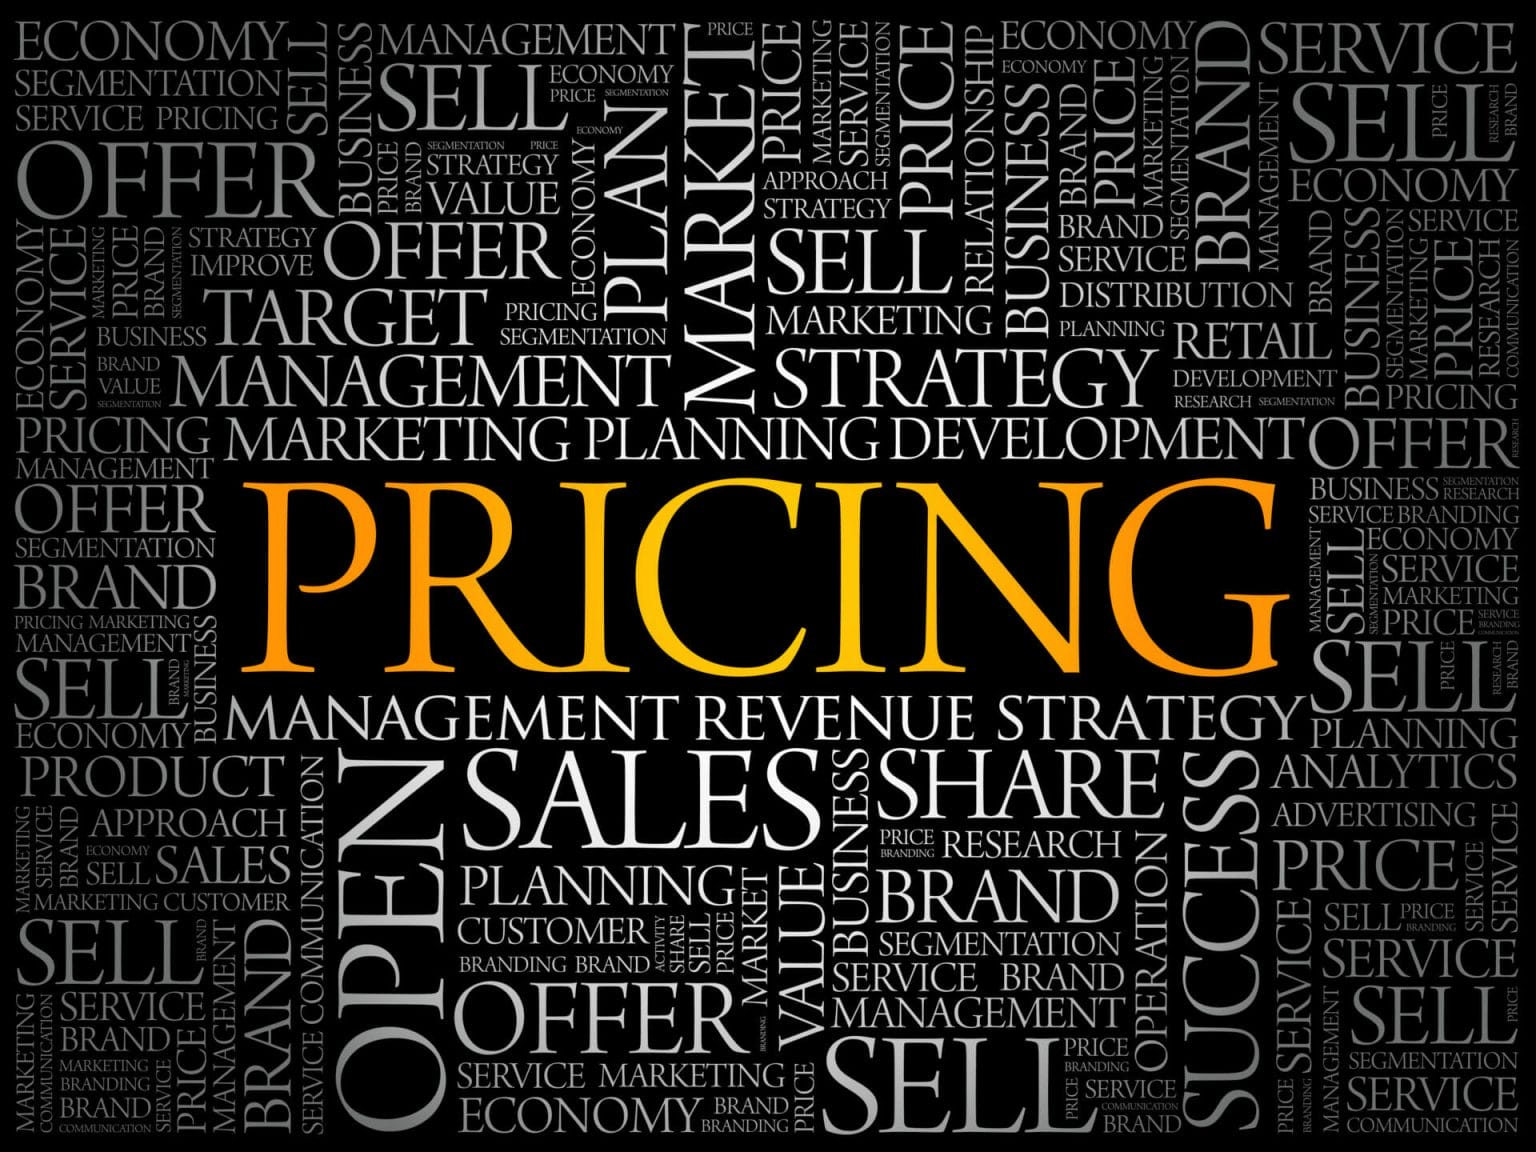 Sales Training with Pricing Diagnostic